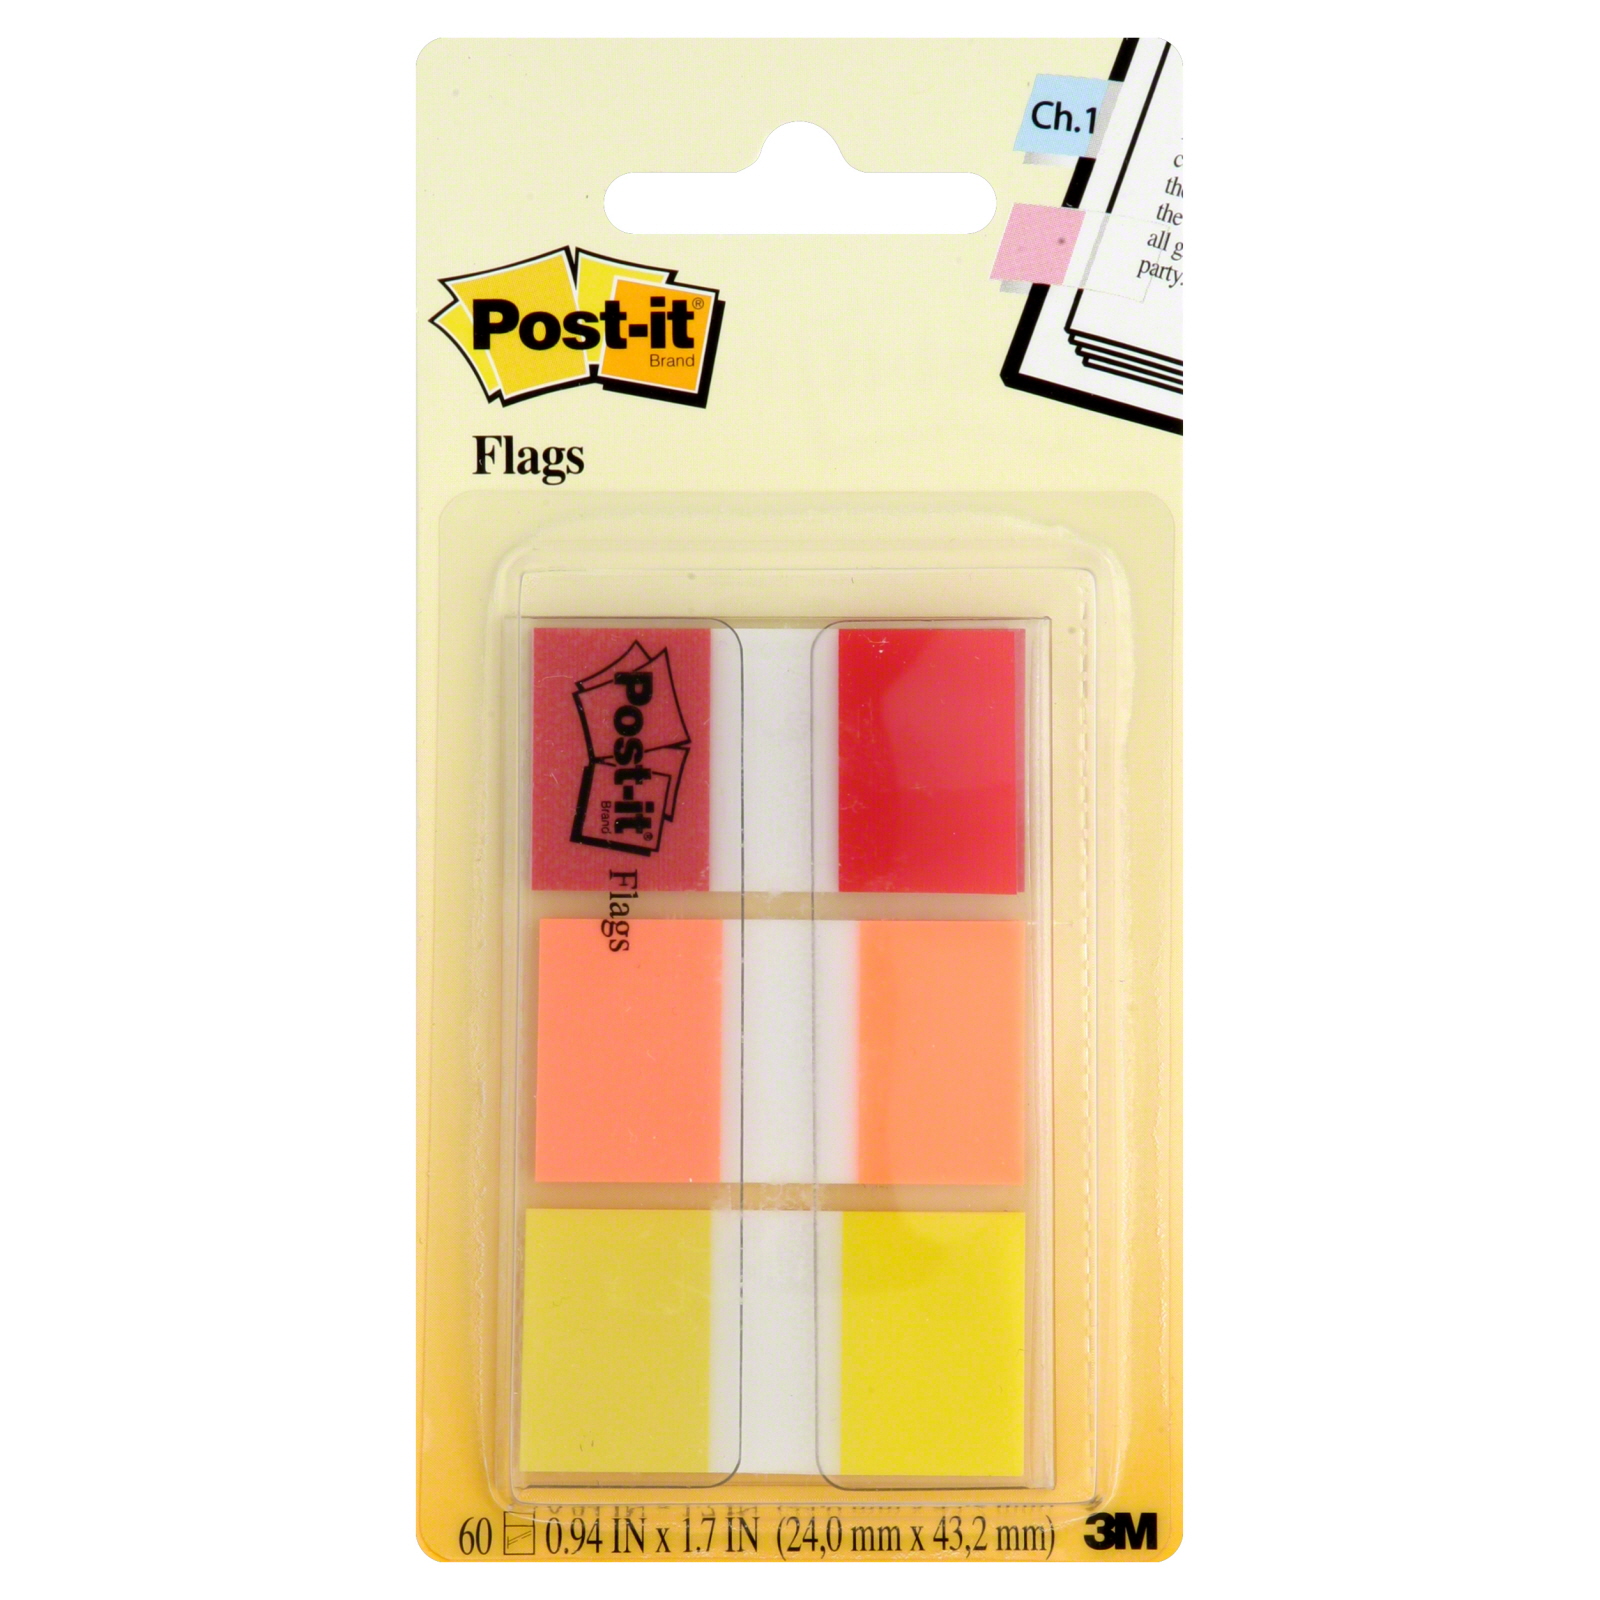 Post-it 680-ROY  Flags, 60 flags